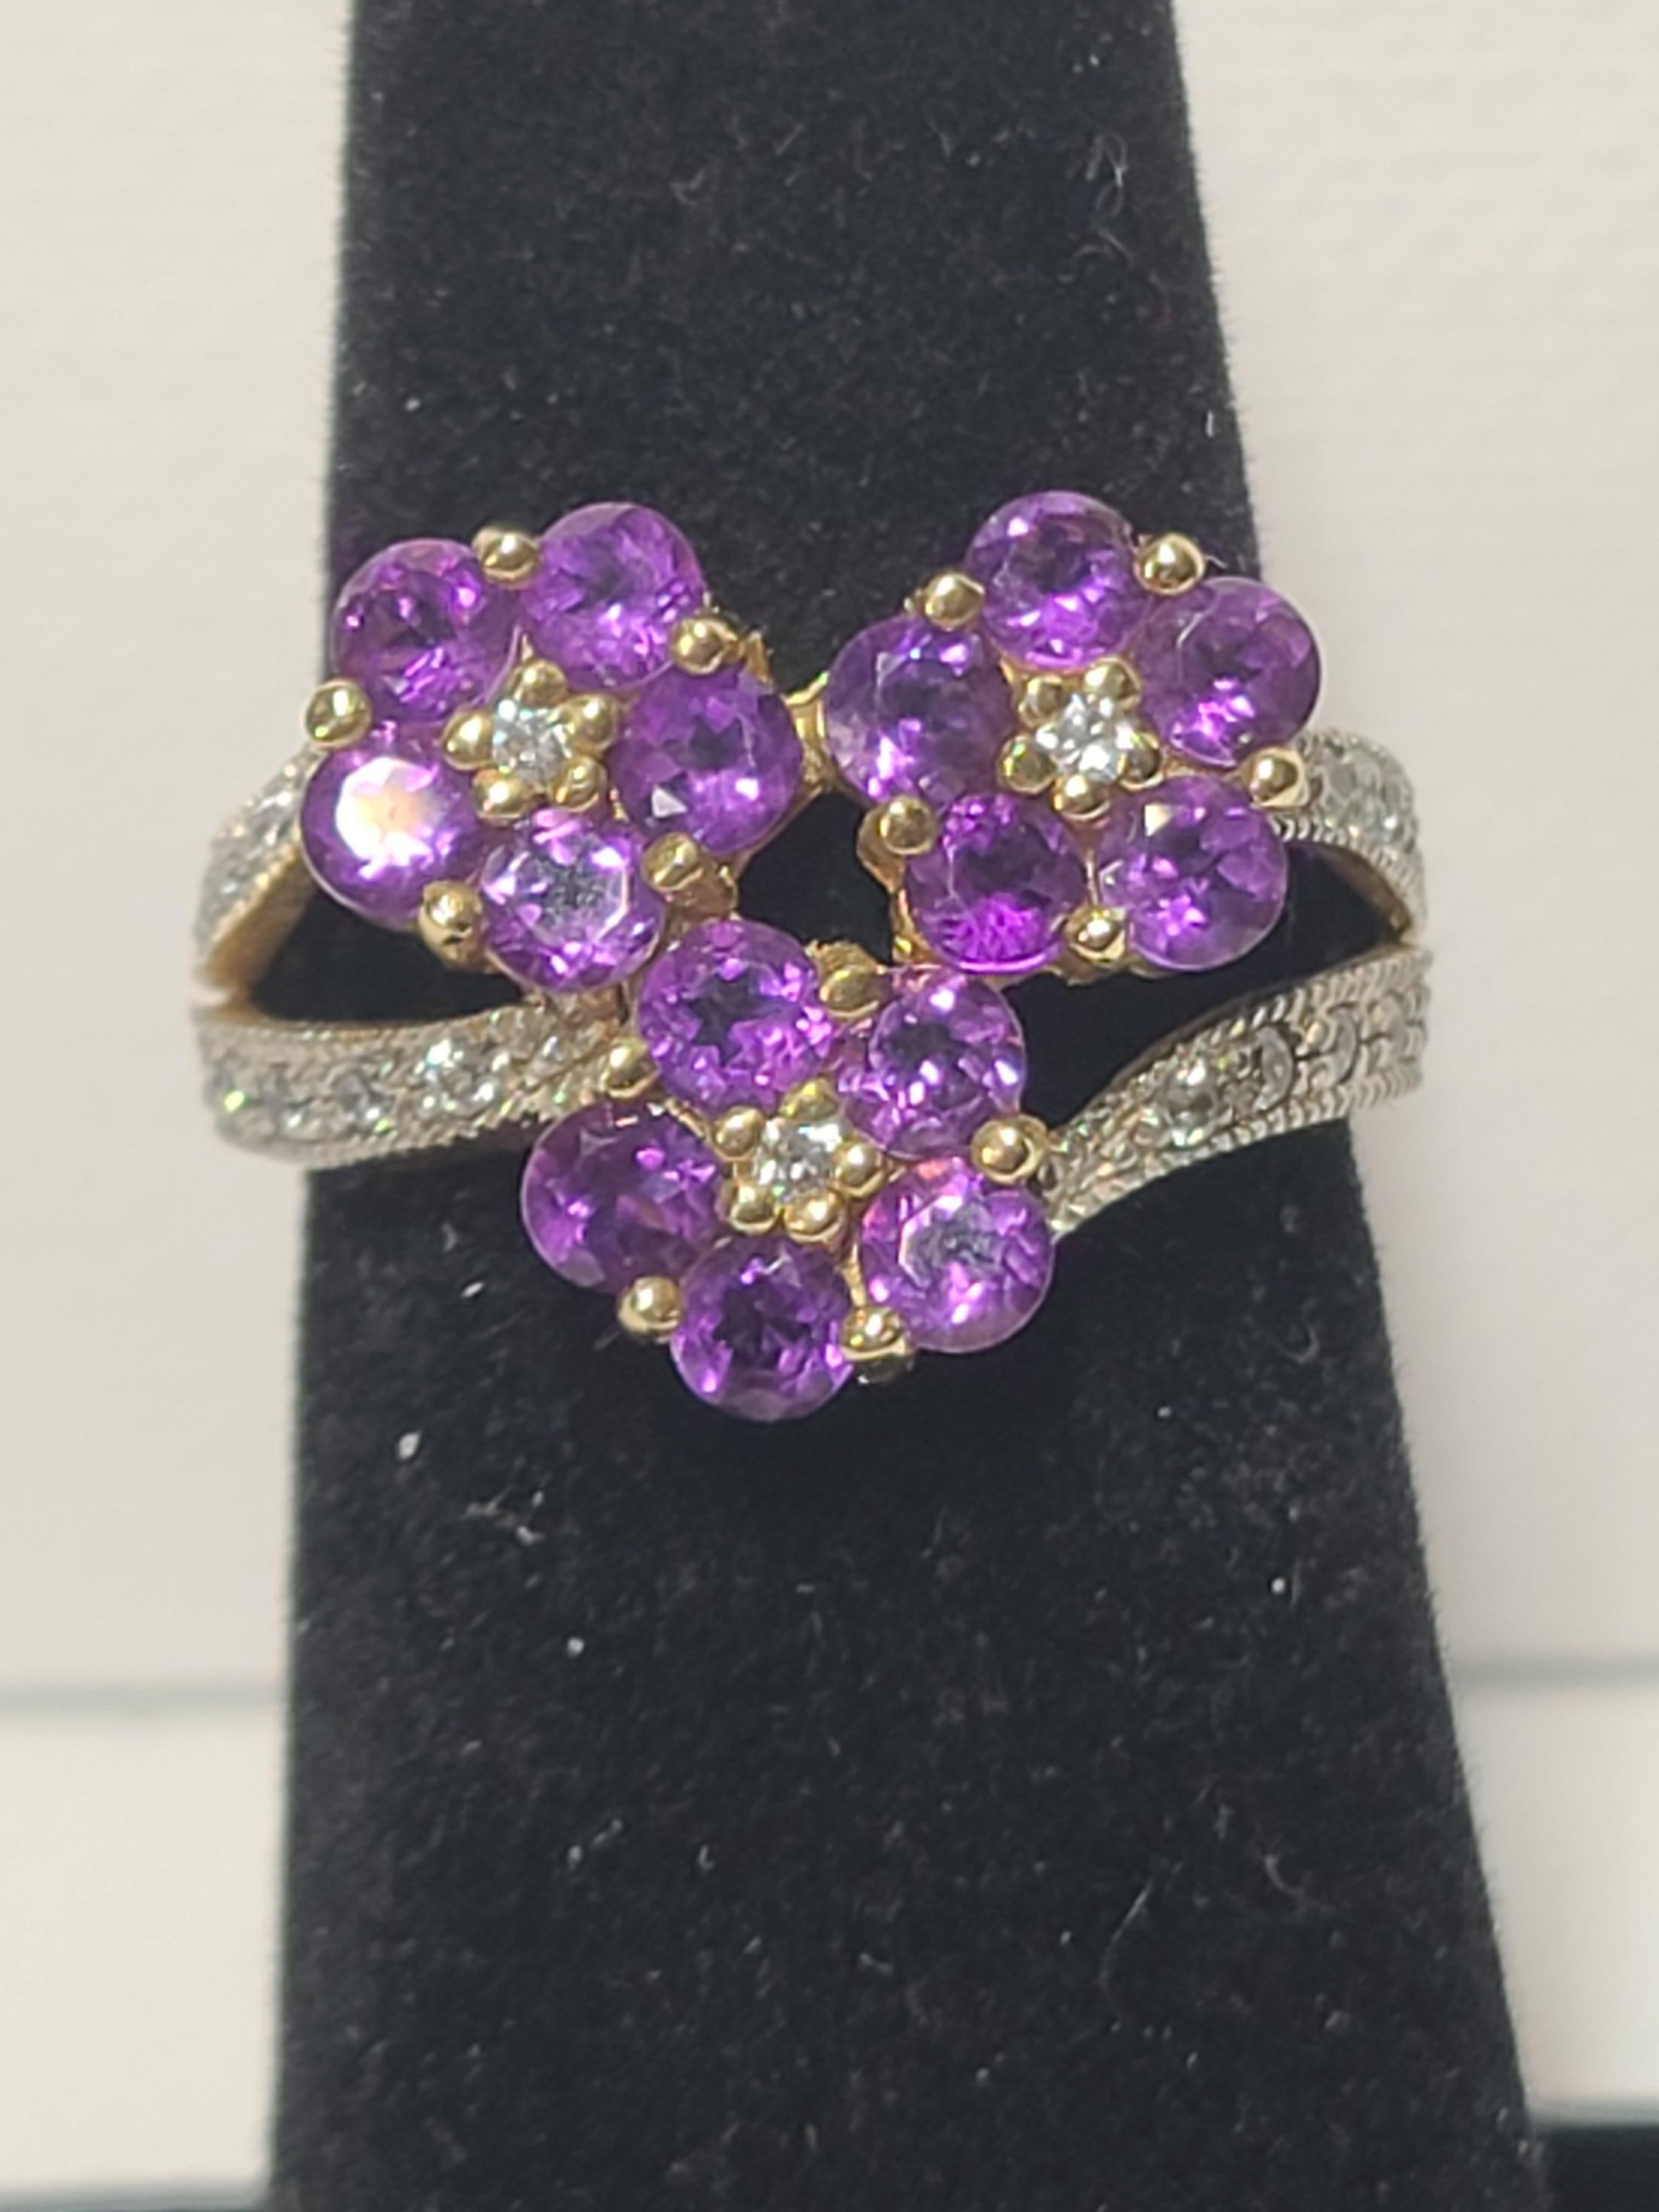 This fashionable ring features 15 small round cut amethysts with a diamond center made to look like 3 beautiful purple flowers, the band also features several accent diamonds set in 14K yellow gold.
The ring weighs 4.4 grams total.
The ring size is